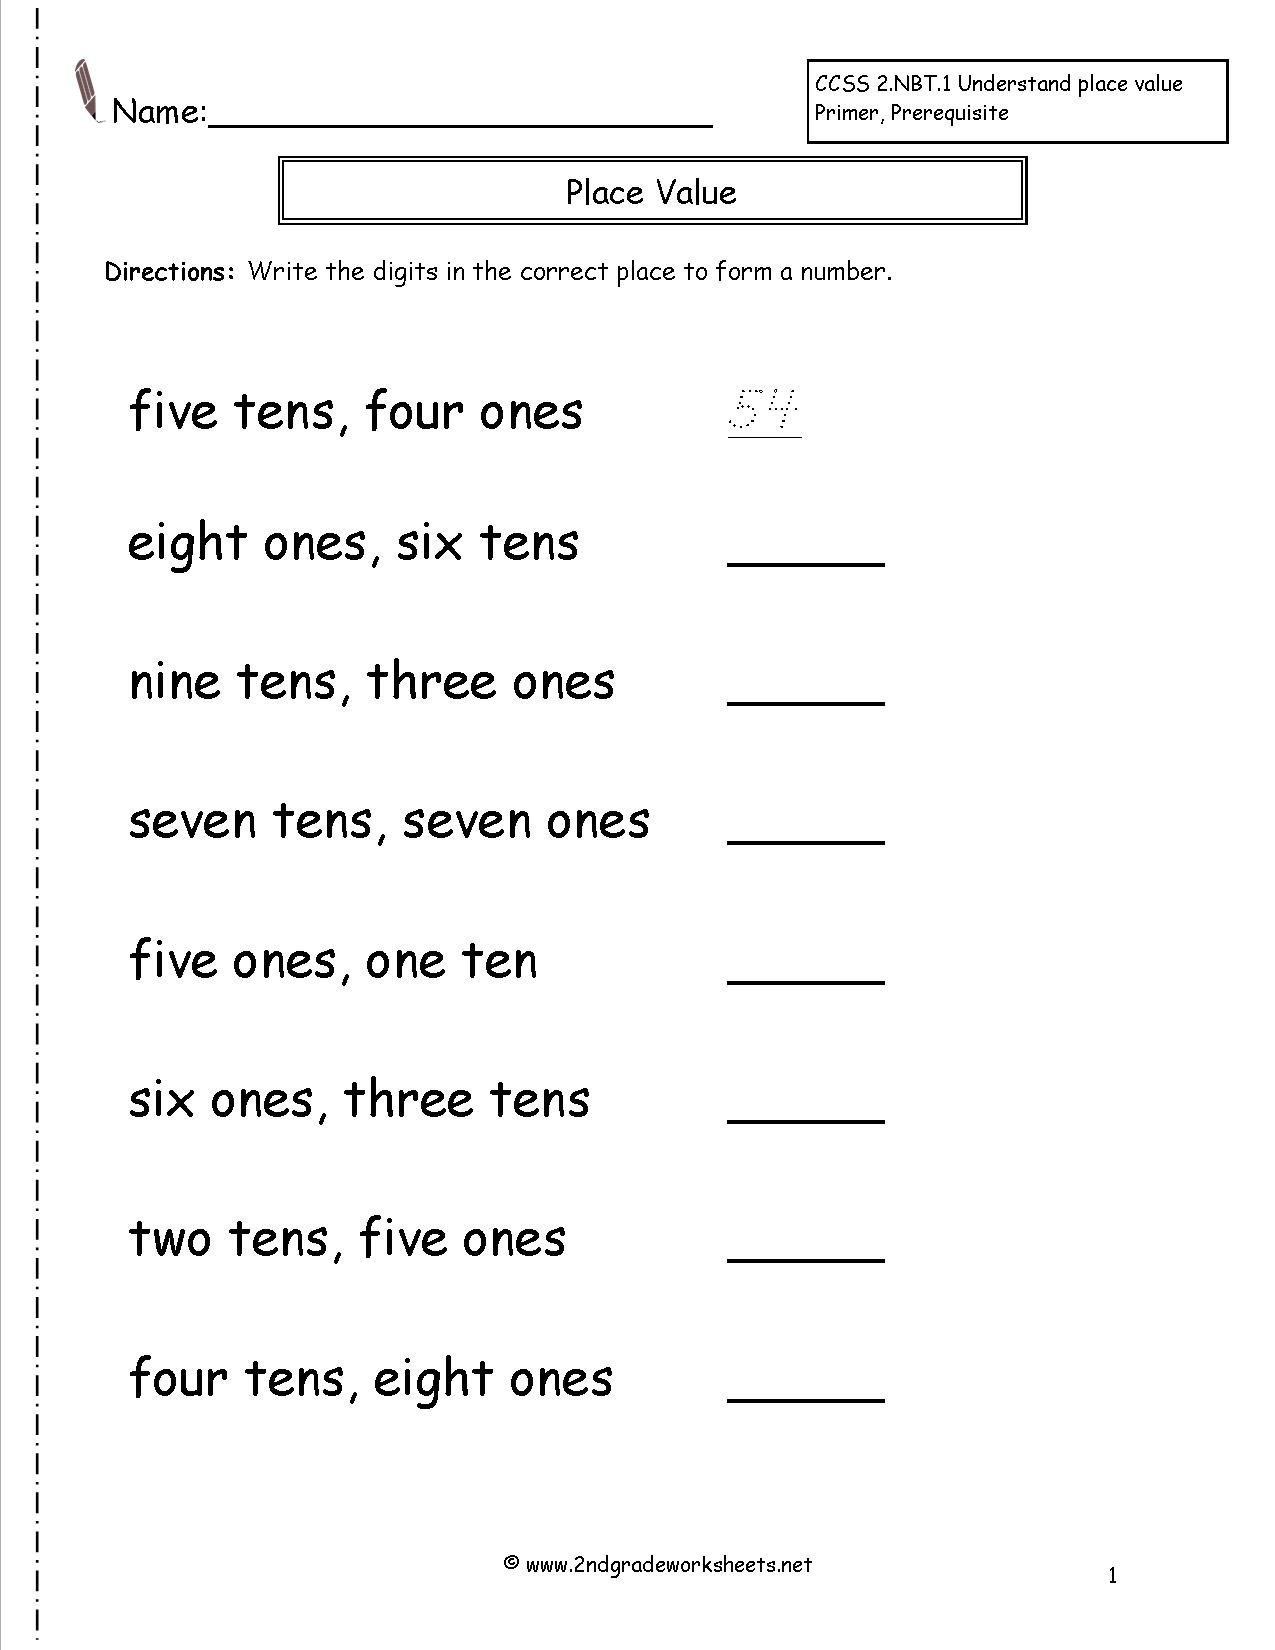 Second Grade Place Value Worksheets Intended For Hundreds Tens And Ones Worksheets